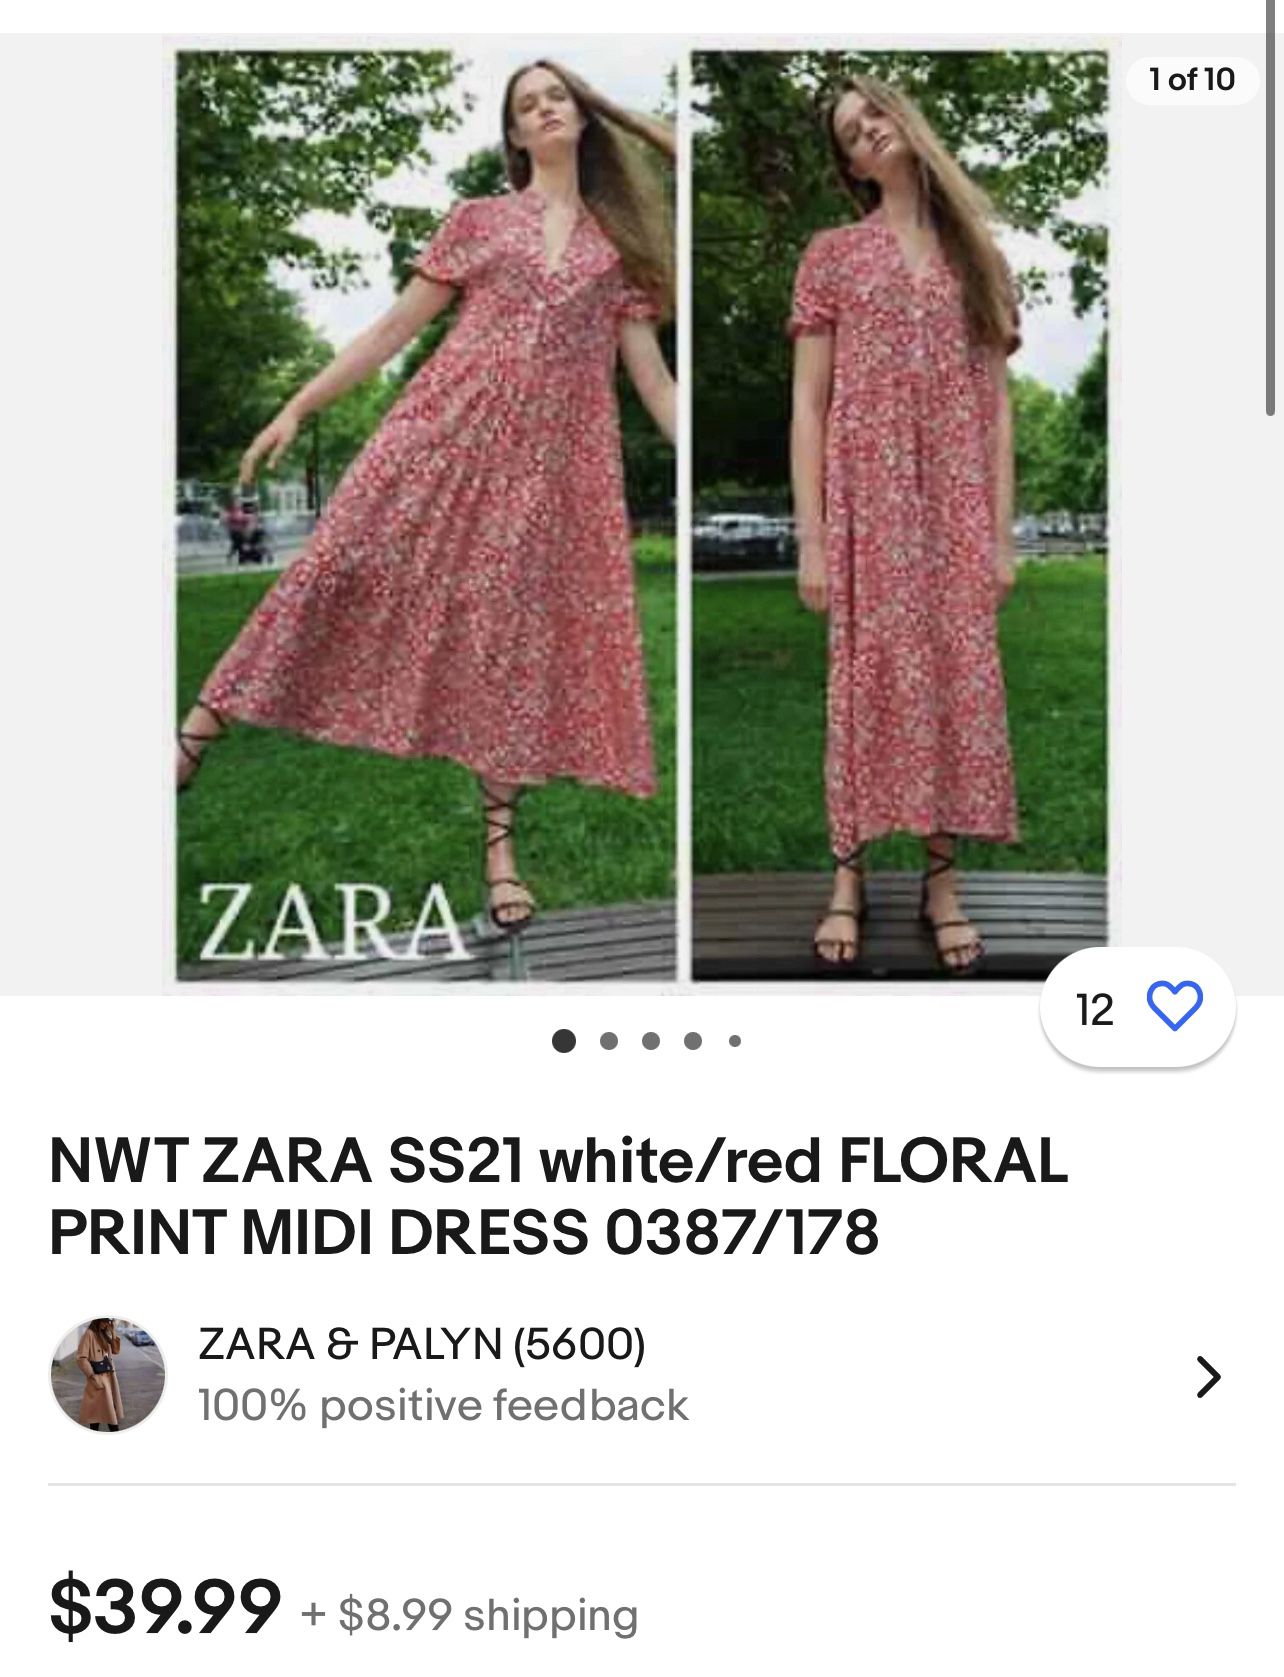 Brand New ZARA SS21 white/red FLORAL PRINT MIDI DRESS 0387/178 ; Condition. New with tags